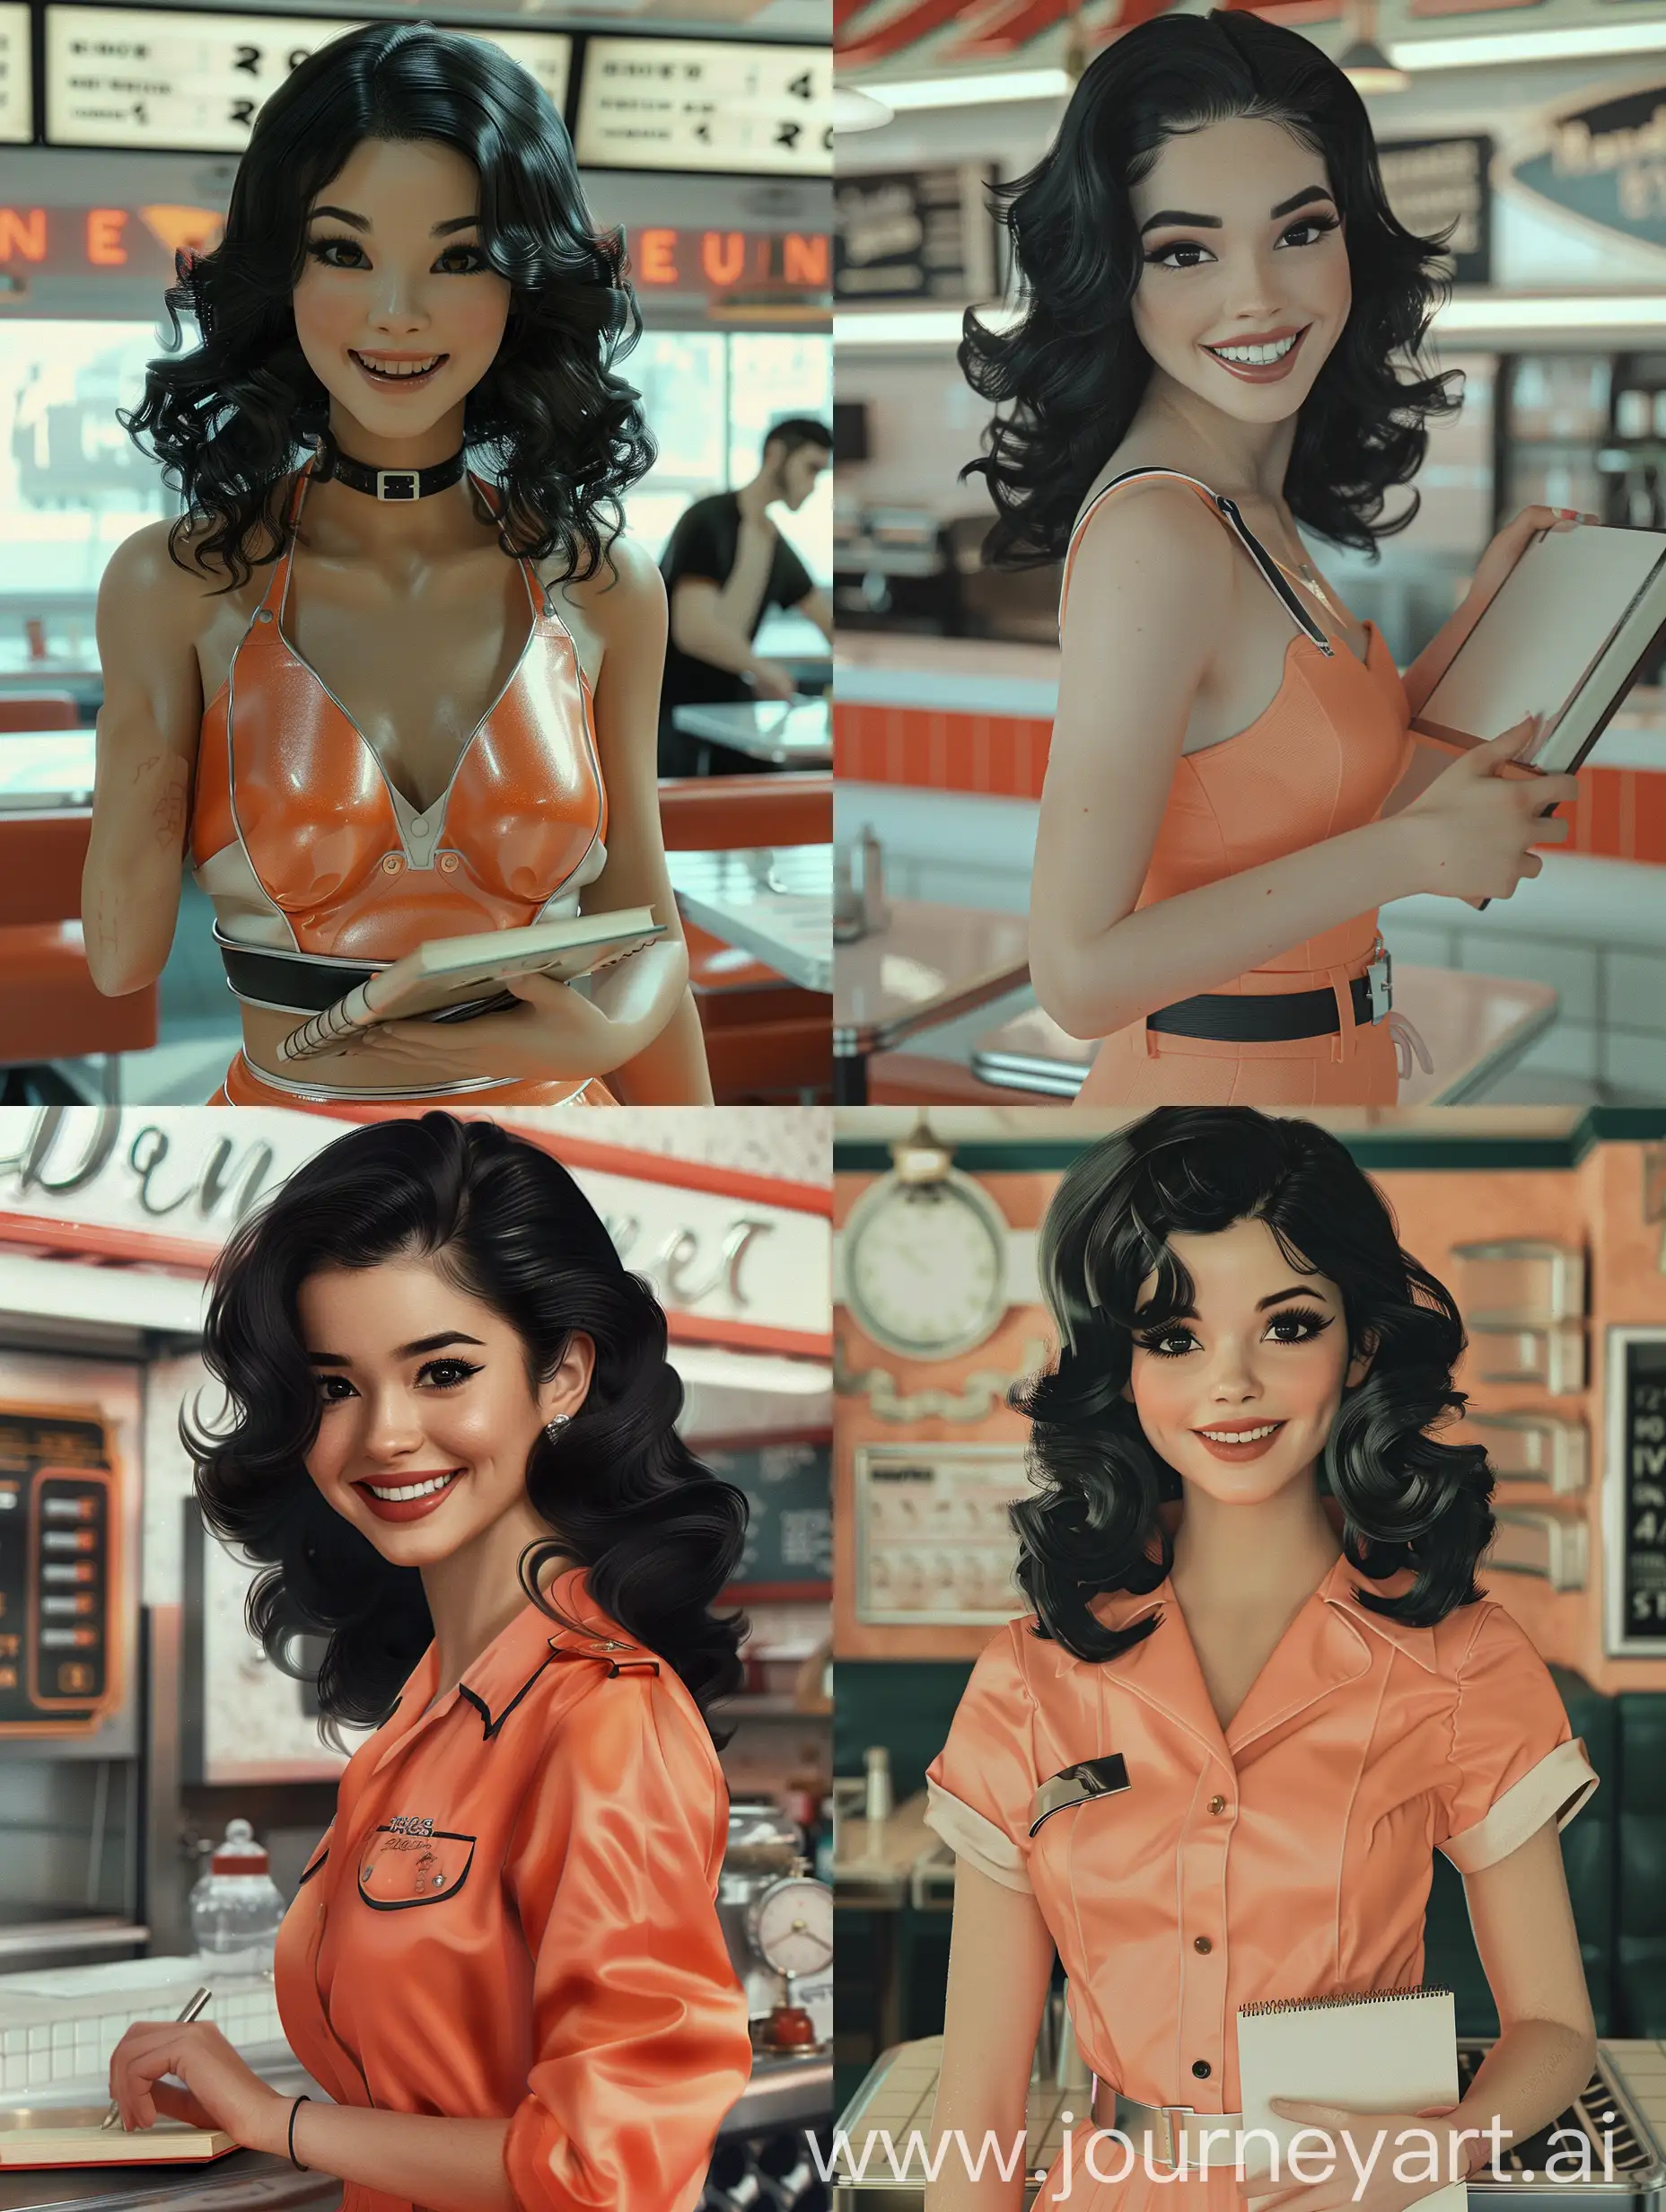 Sexy-80s-Waitress-with-Retro-Vibe-Serving-in-Vintage-Diner